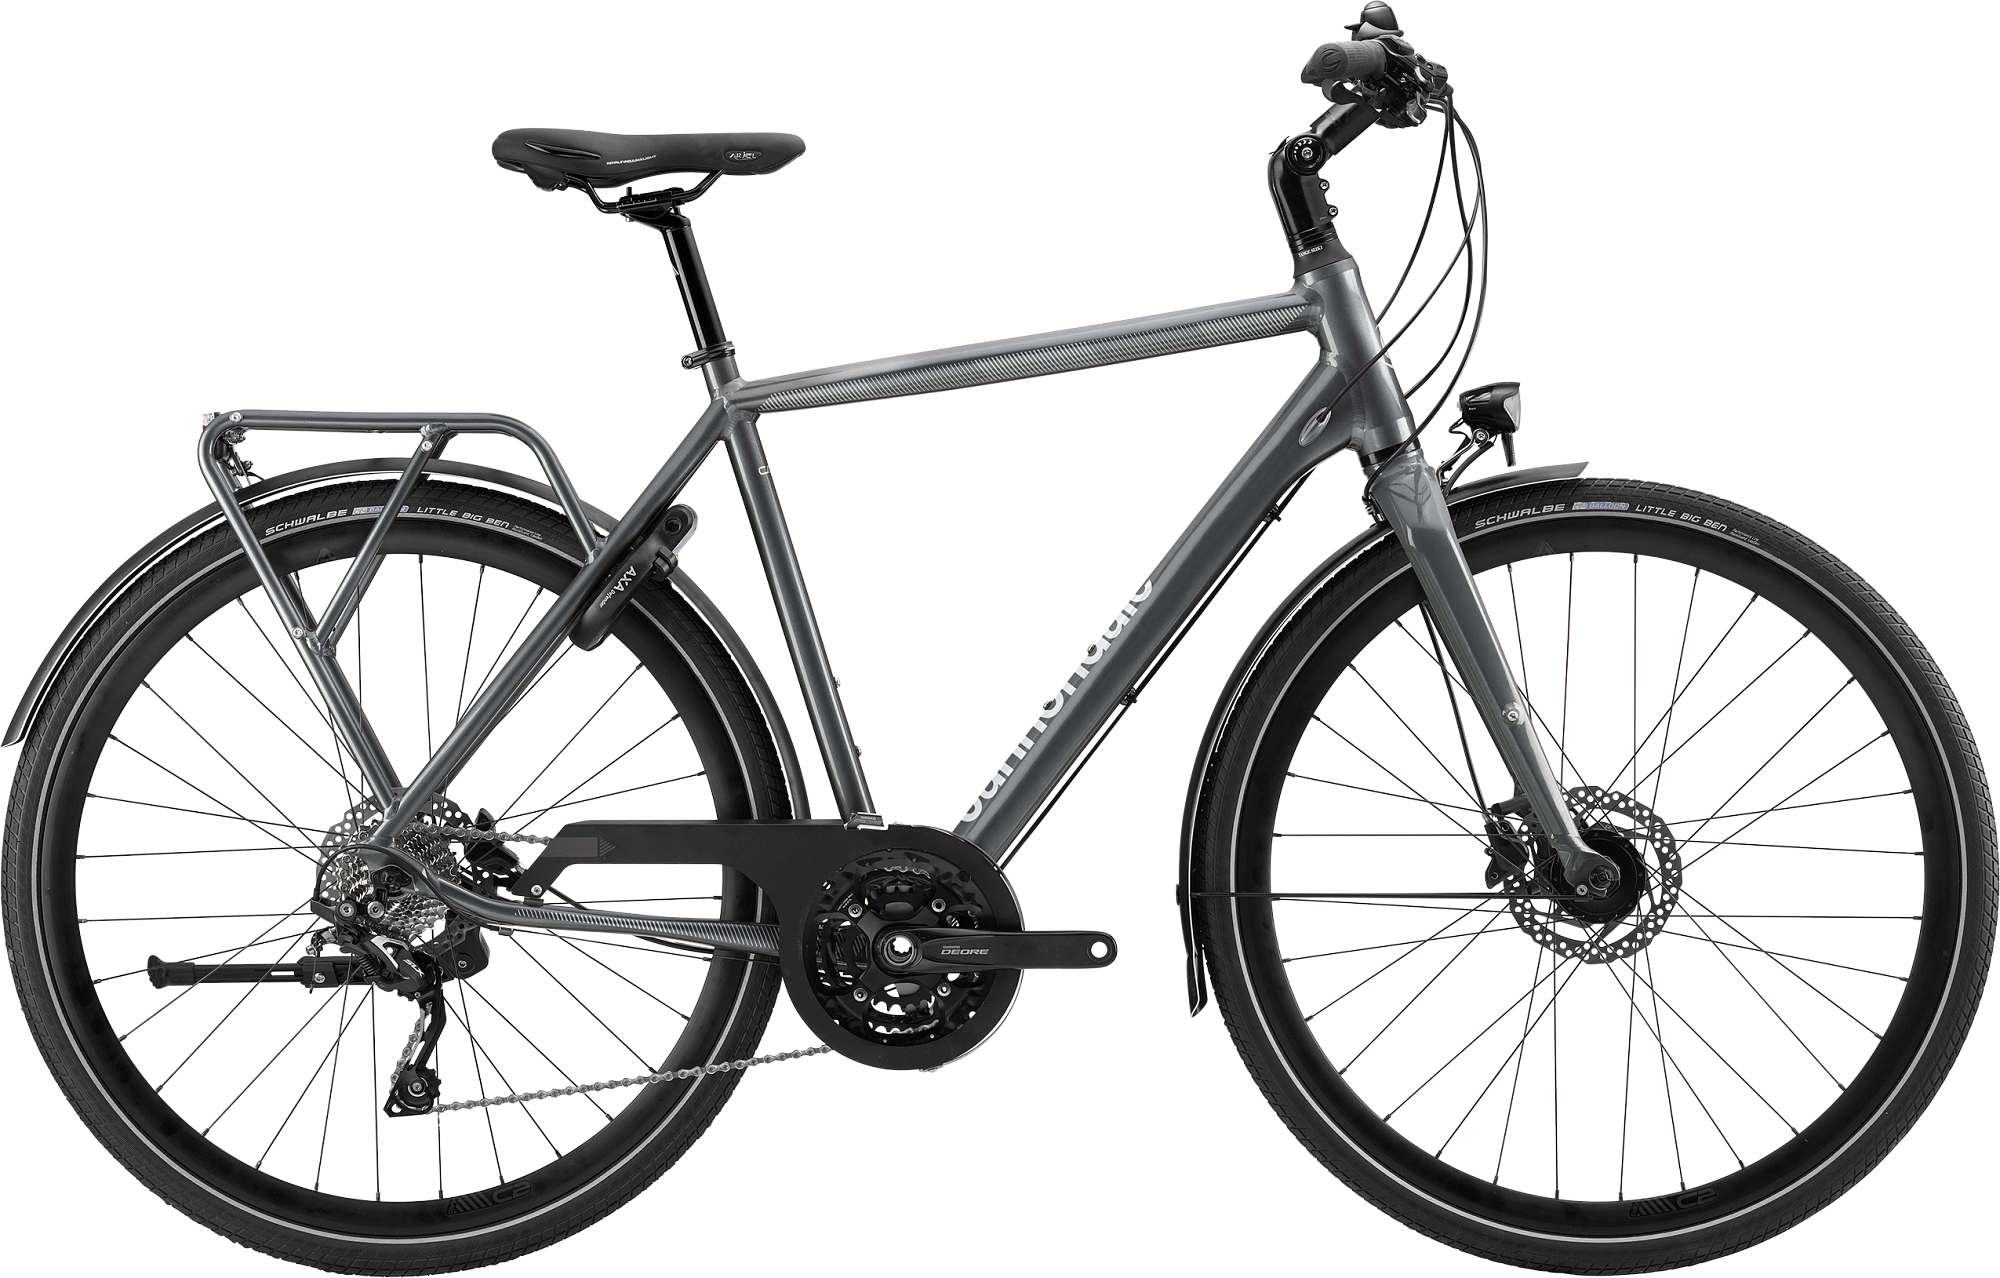 Paint for 2021 Cannondale Tesoro 2 (C35209M) - Gloss Charcoal Grey